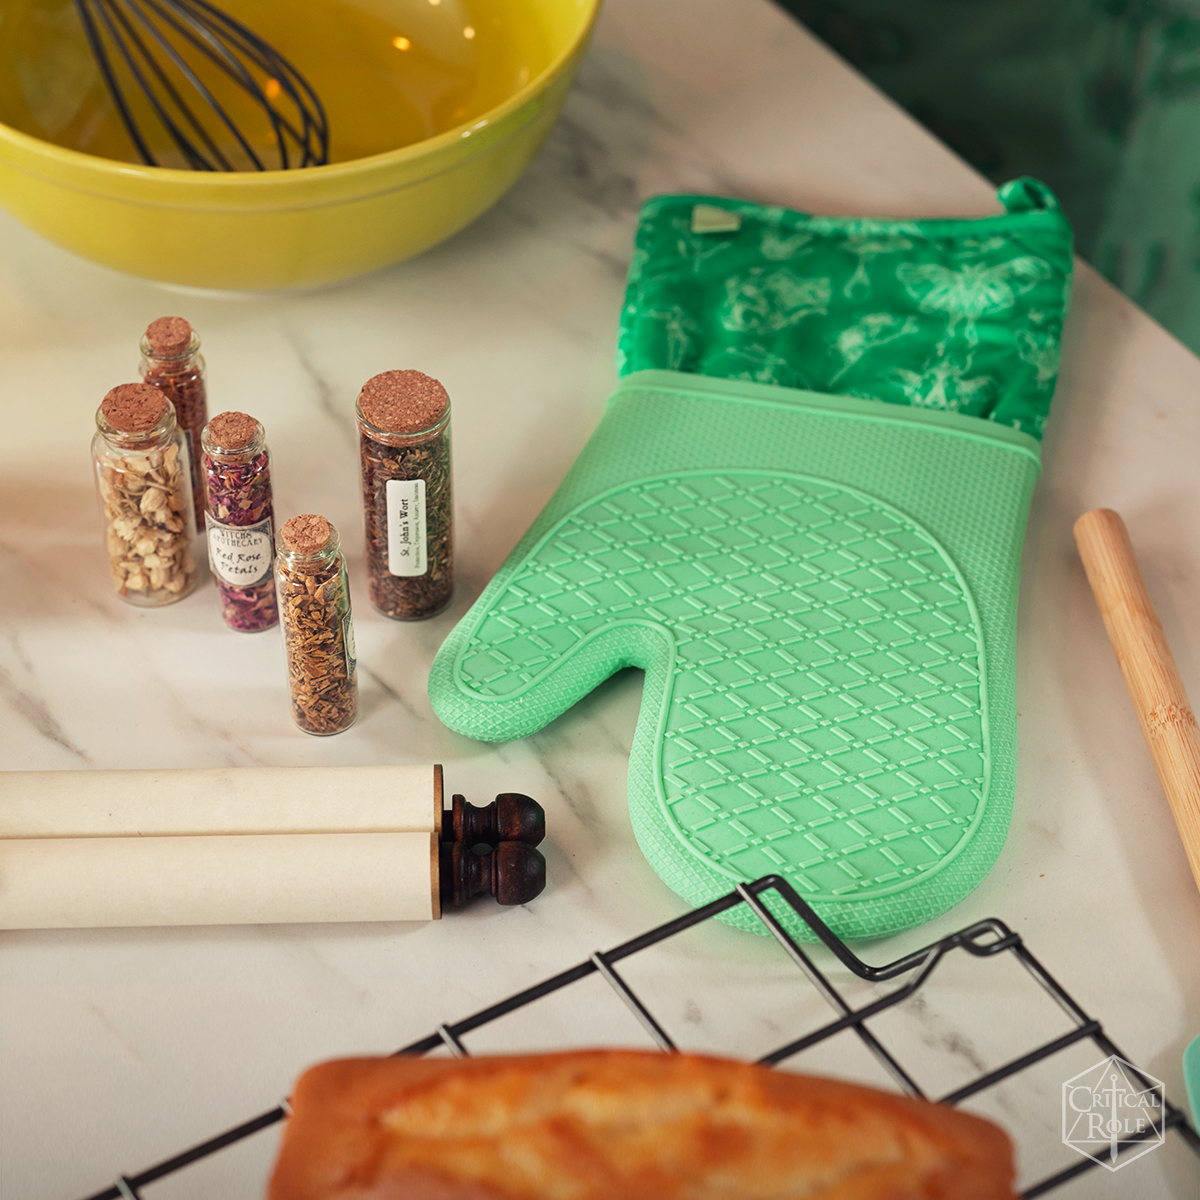 Oven Mitts & Pot Holders - Stock Culinary Goods